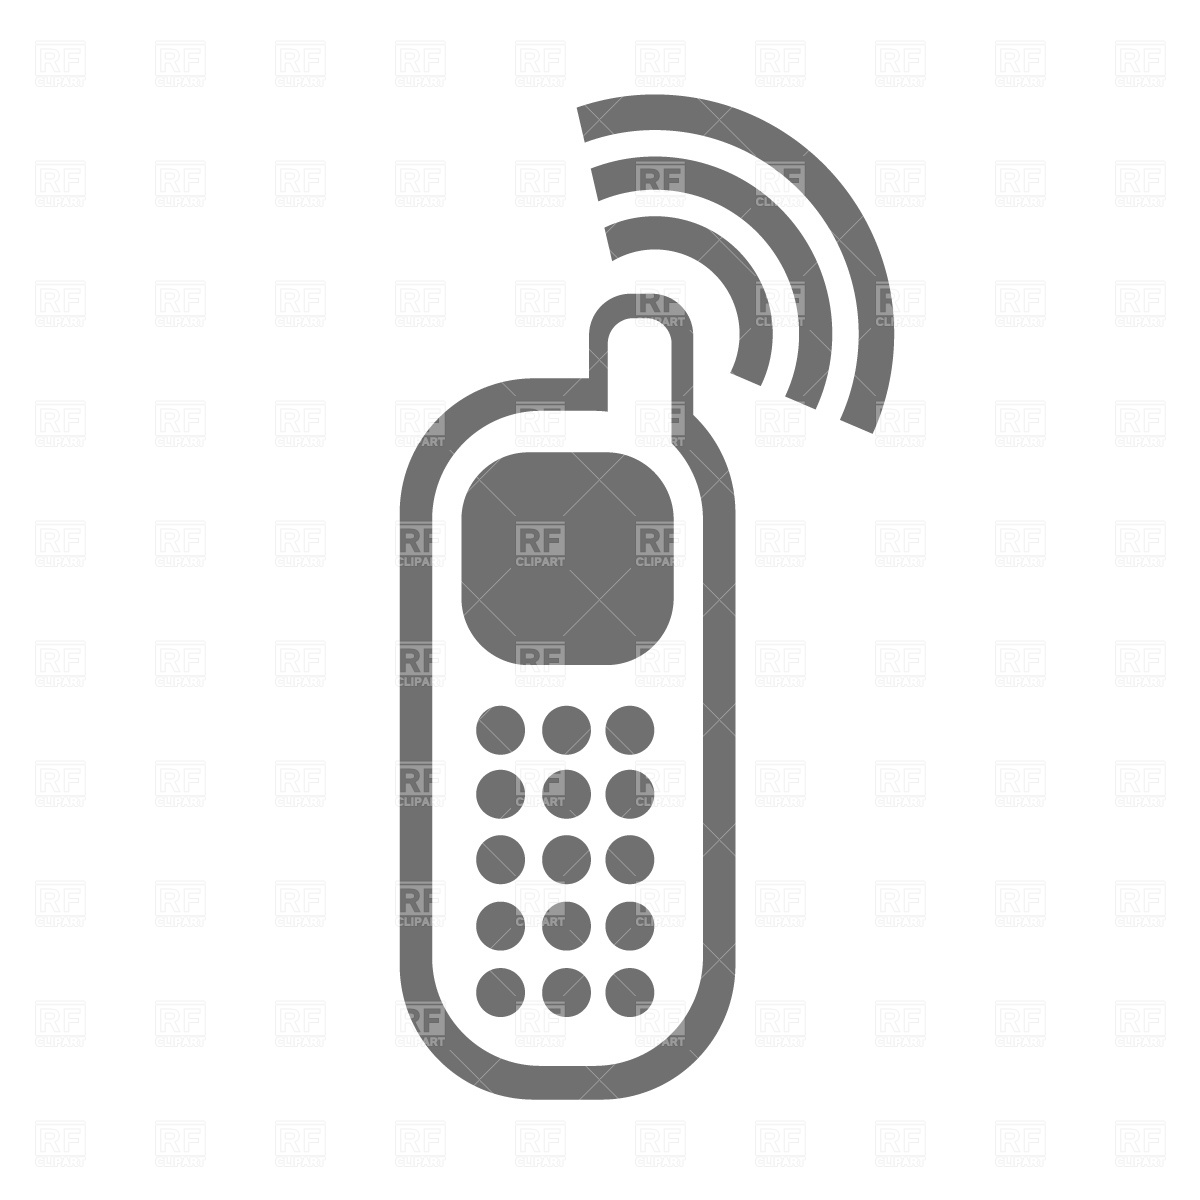 14 Wireless Phone Icons Vectors Images